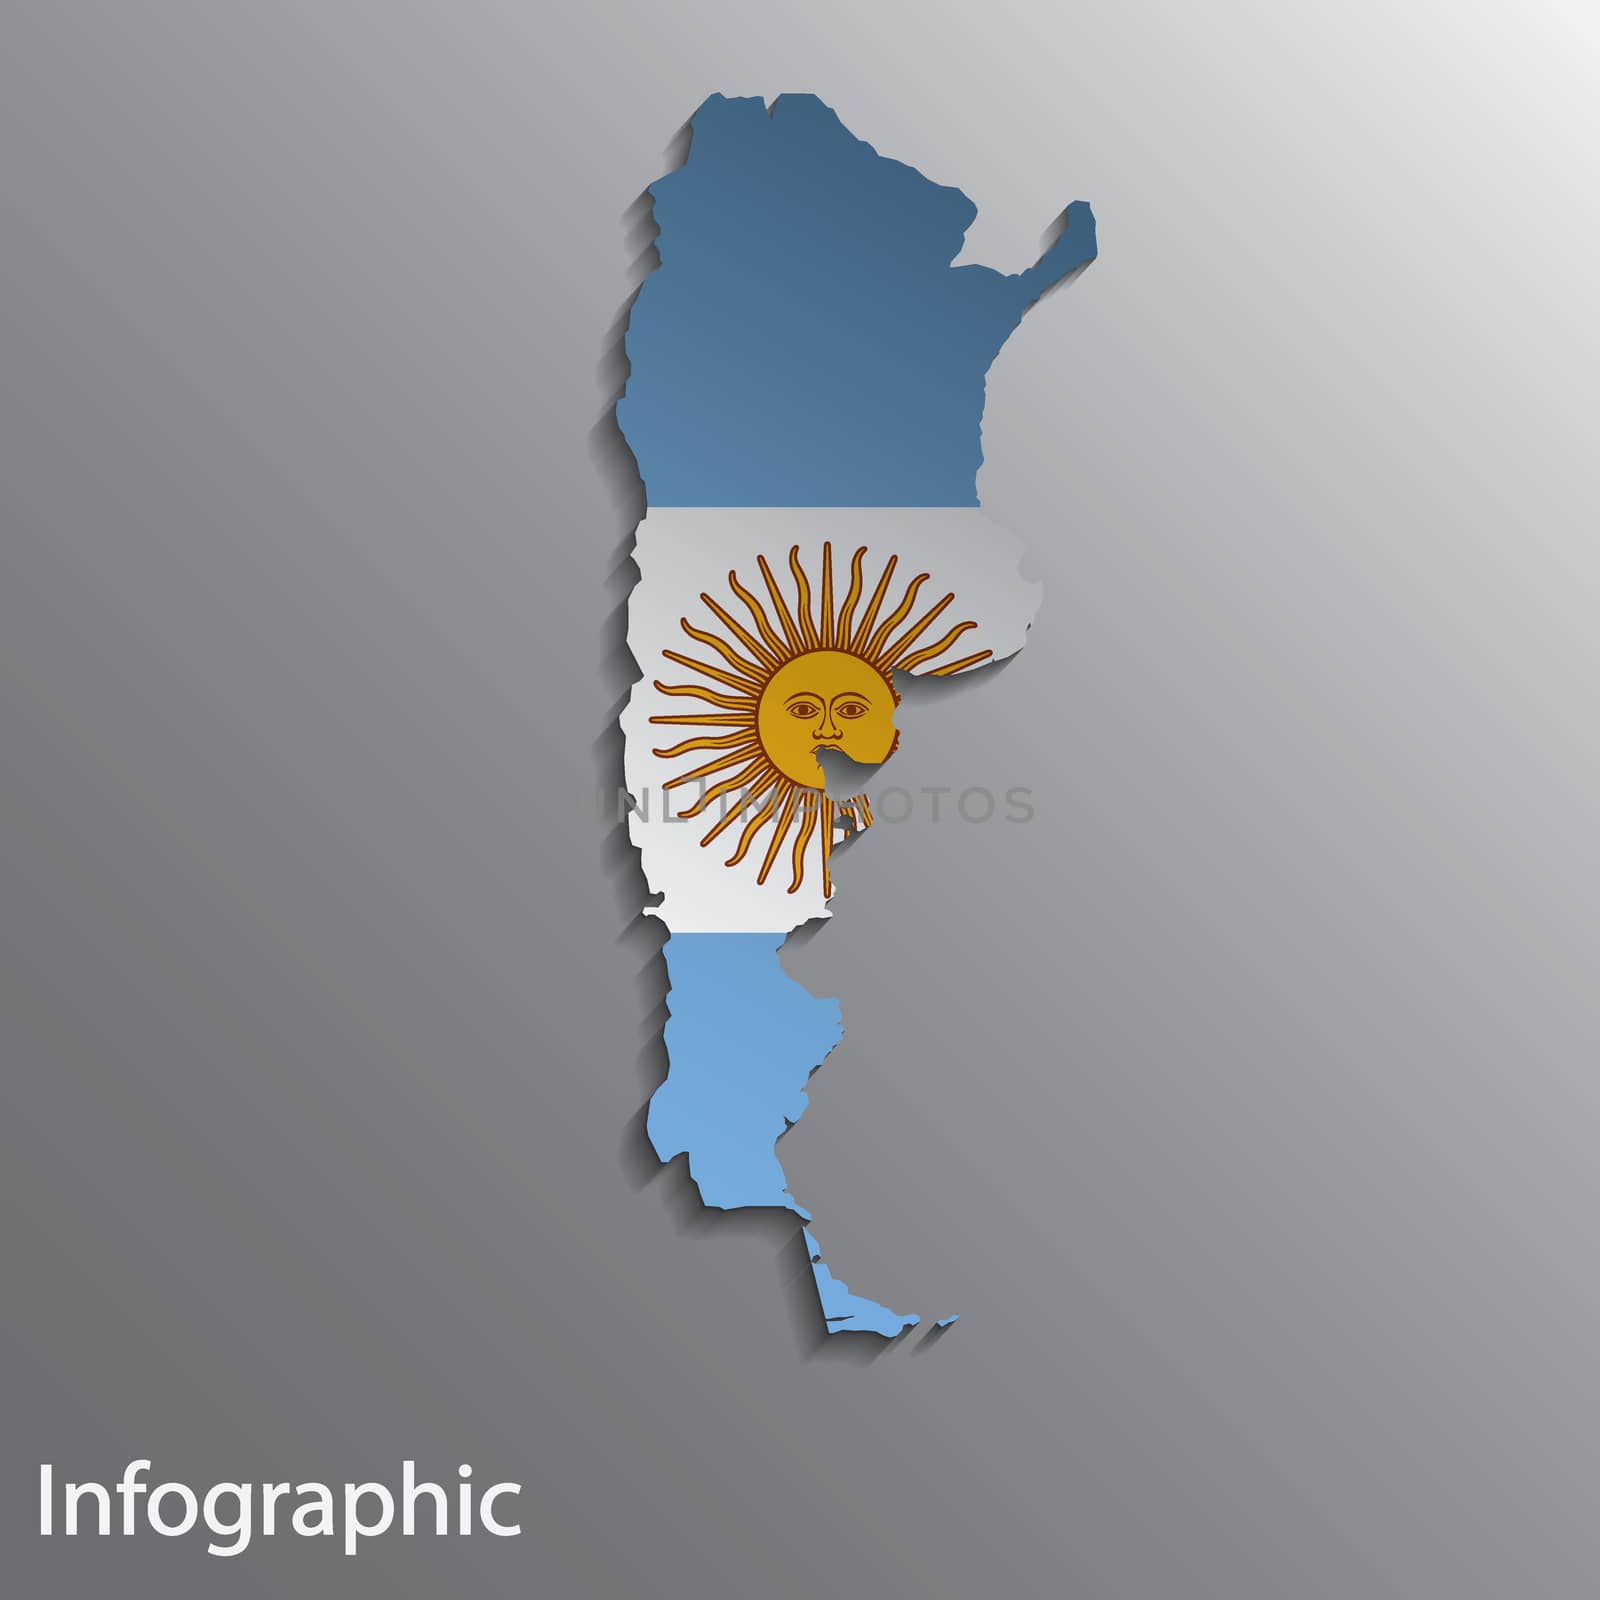 3D Country Map Layout of THE REPUBLIC OF ARGENTINA in Vector EPS10 Format. Effect of Gradient tool and Blend used in this file.